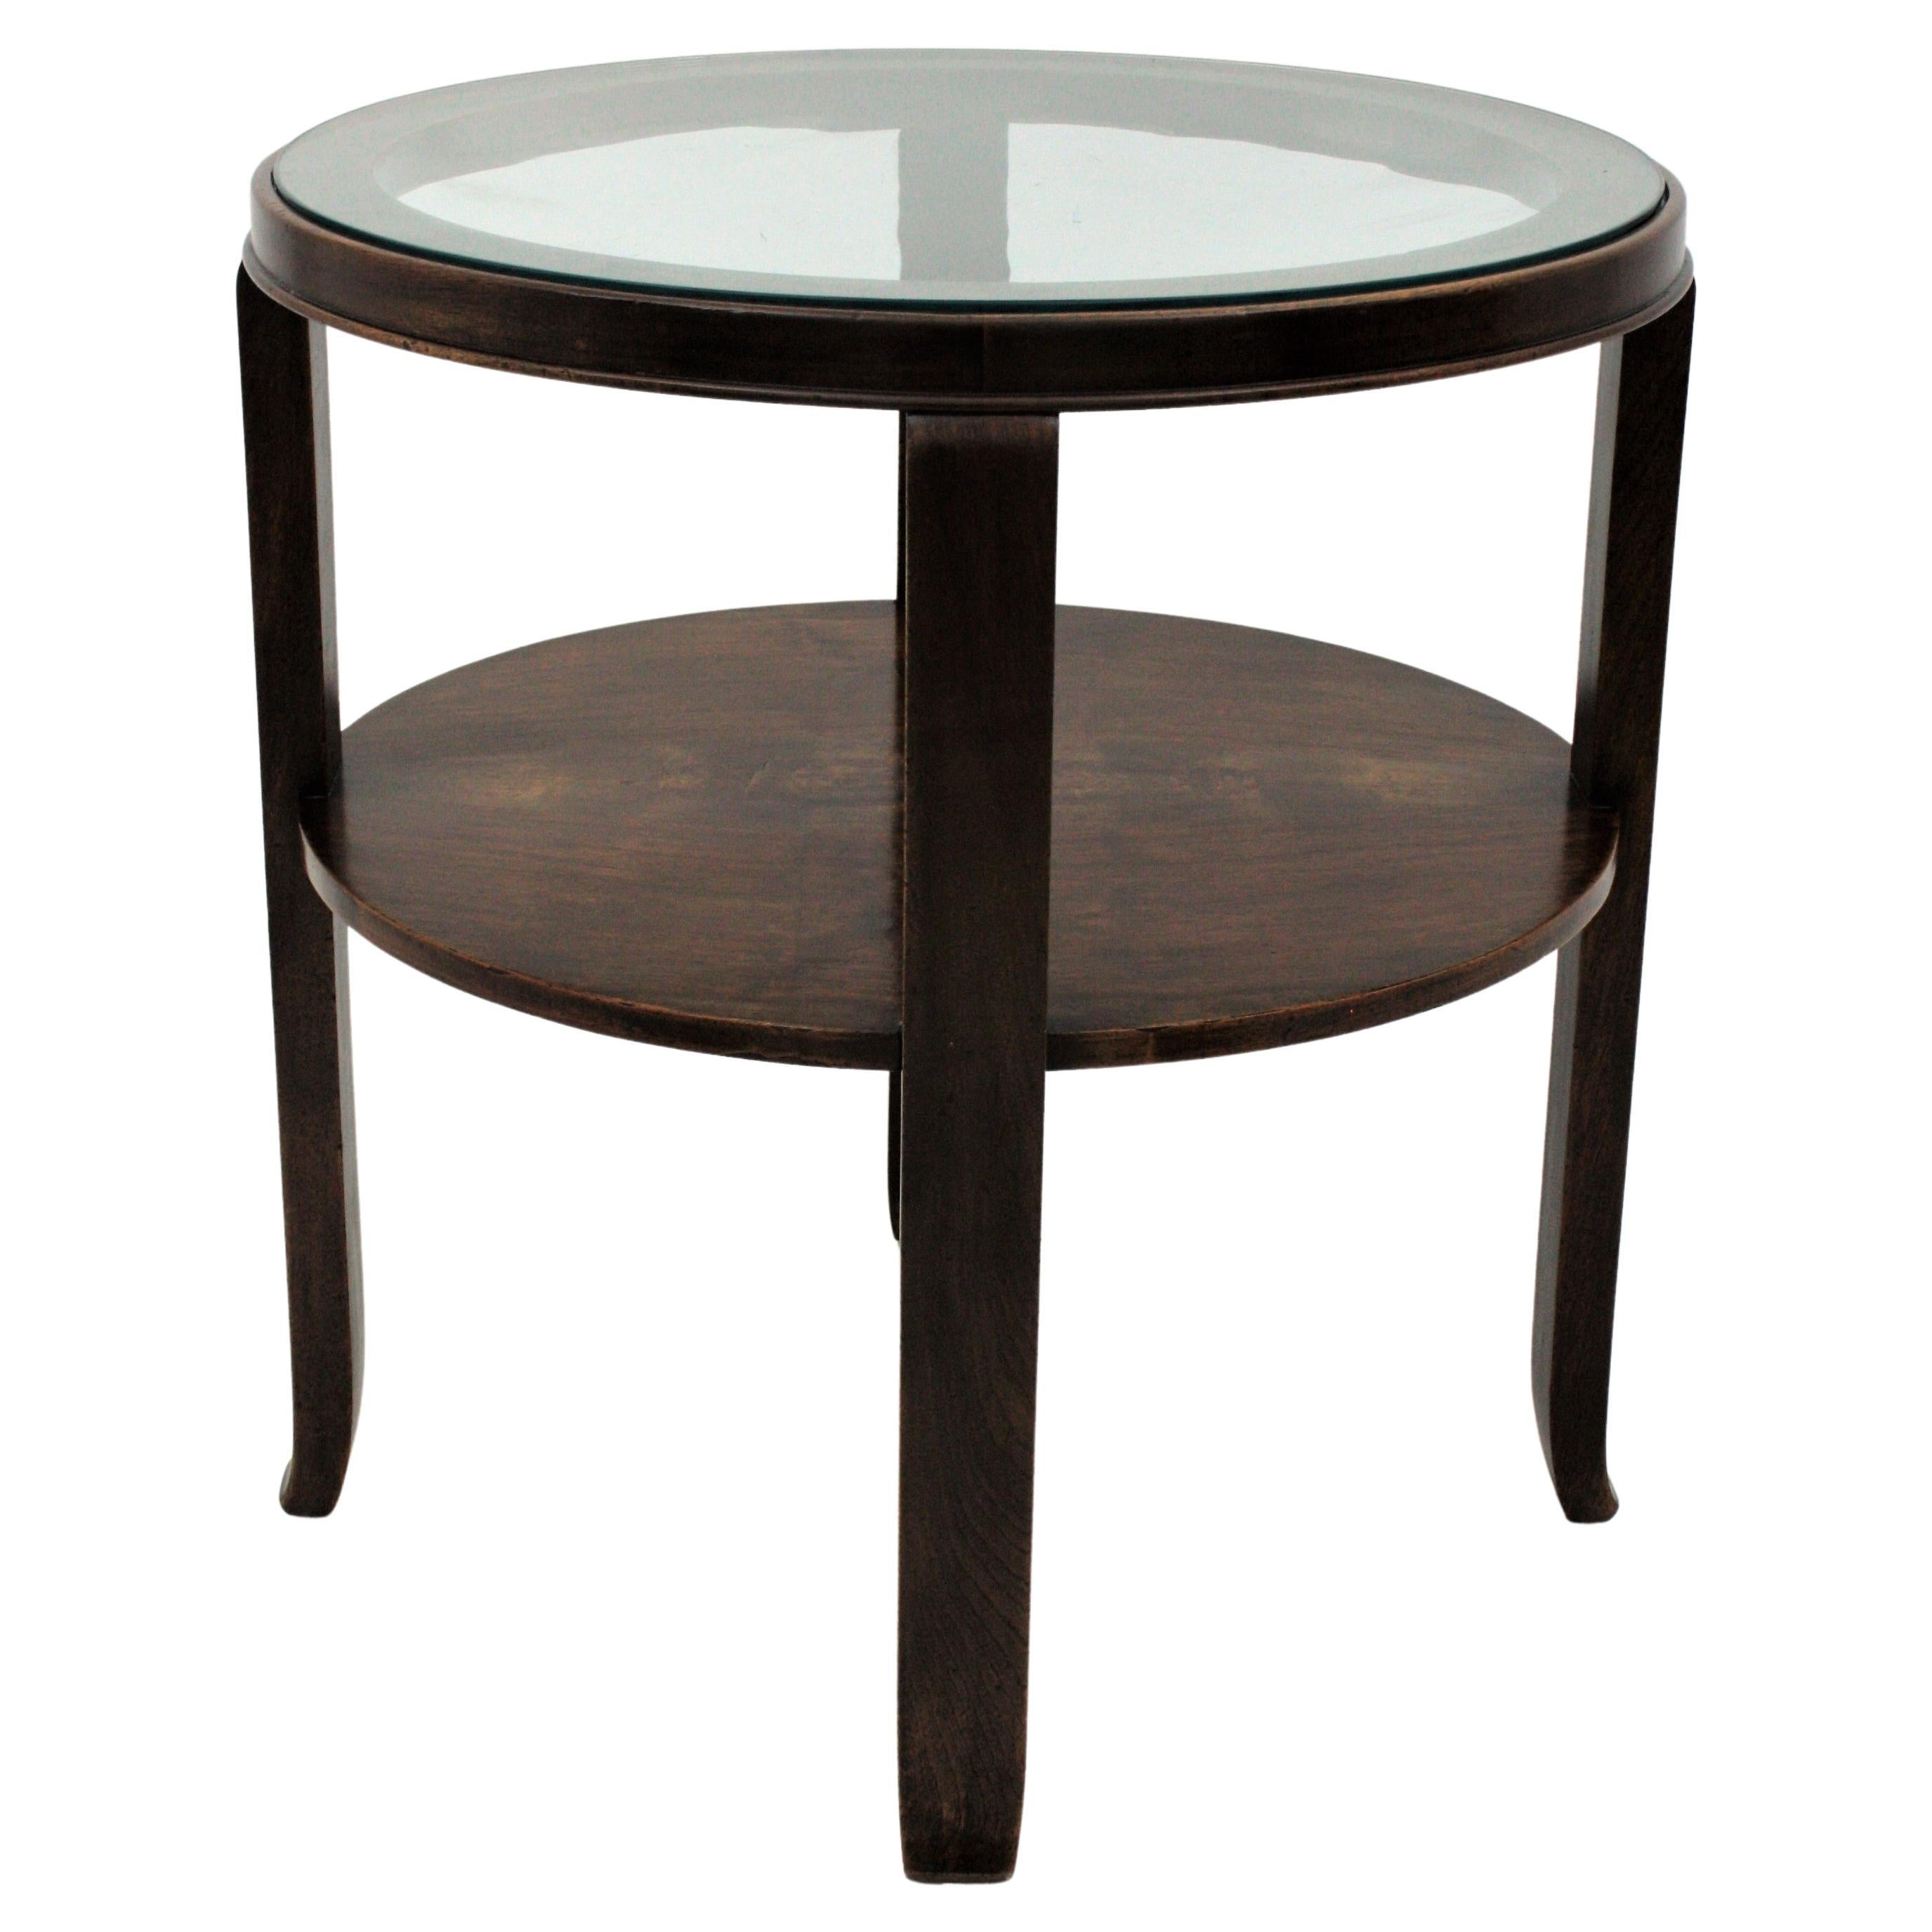 Stylish Art Deco two-tier walnut round gueridon / end or side table with glass top, France, 1930s.
Used as occasional table or drinks table or placed beside a sofa, this table is an elegant choice wherever it is placed.
This table has been carefully